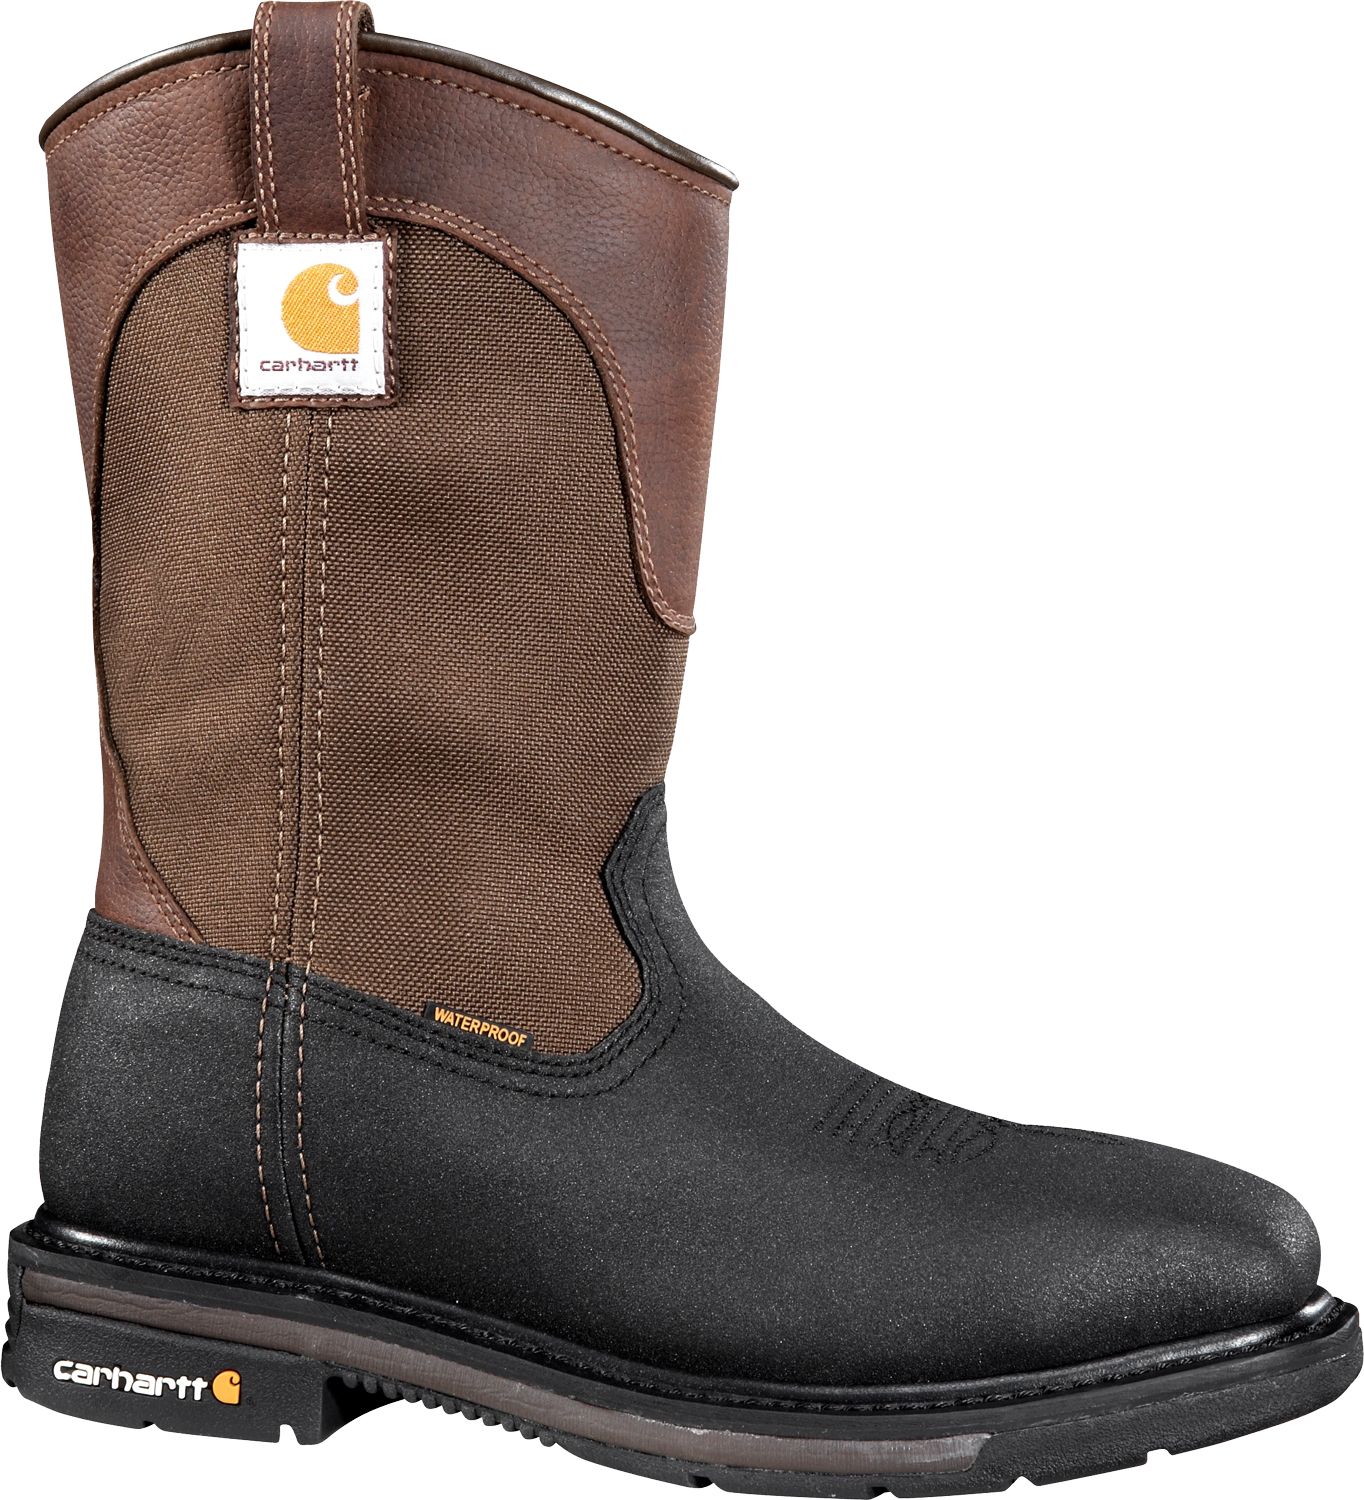 waterproof square toe work boots